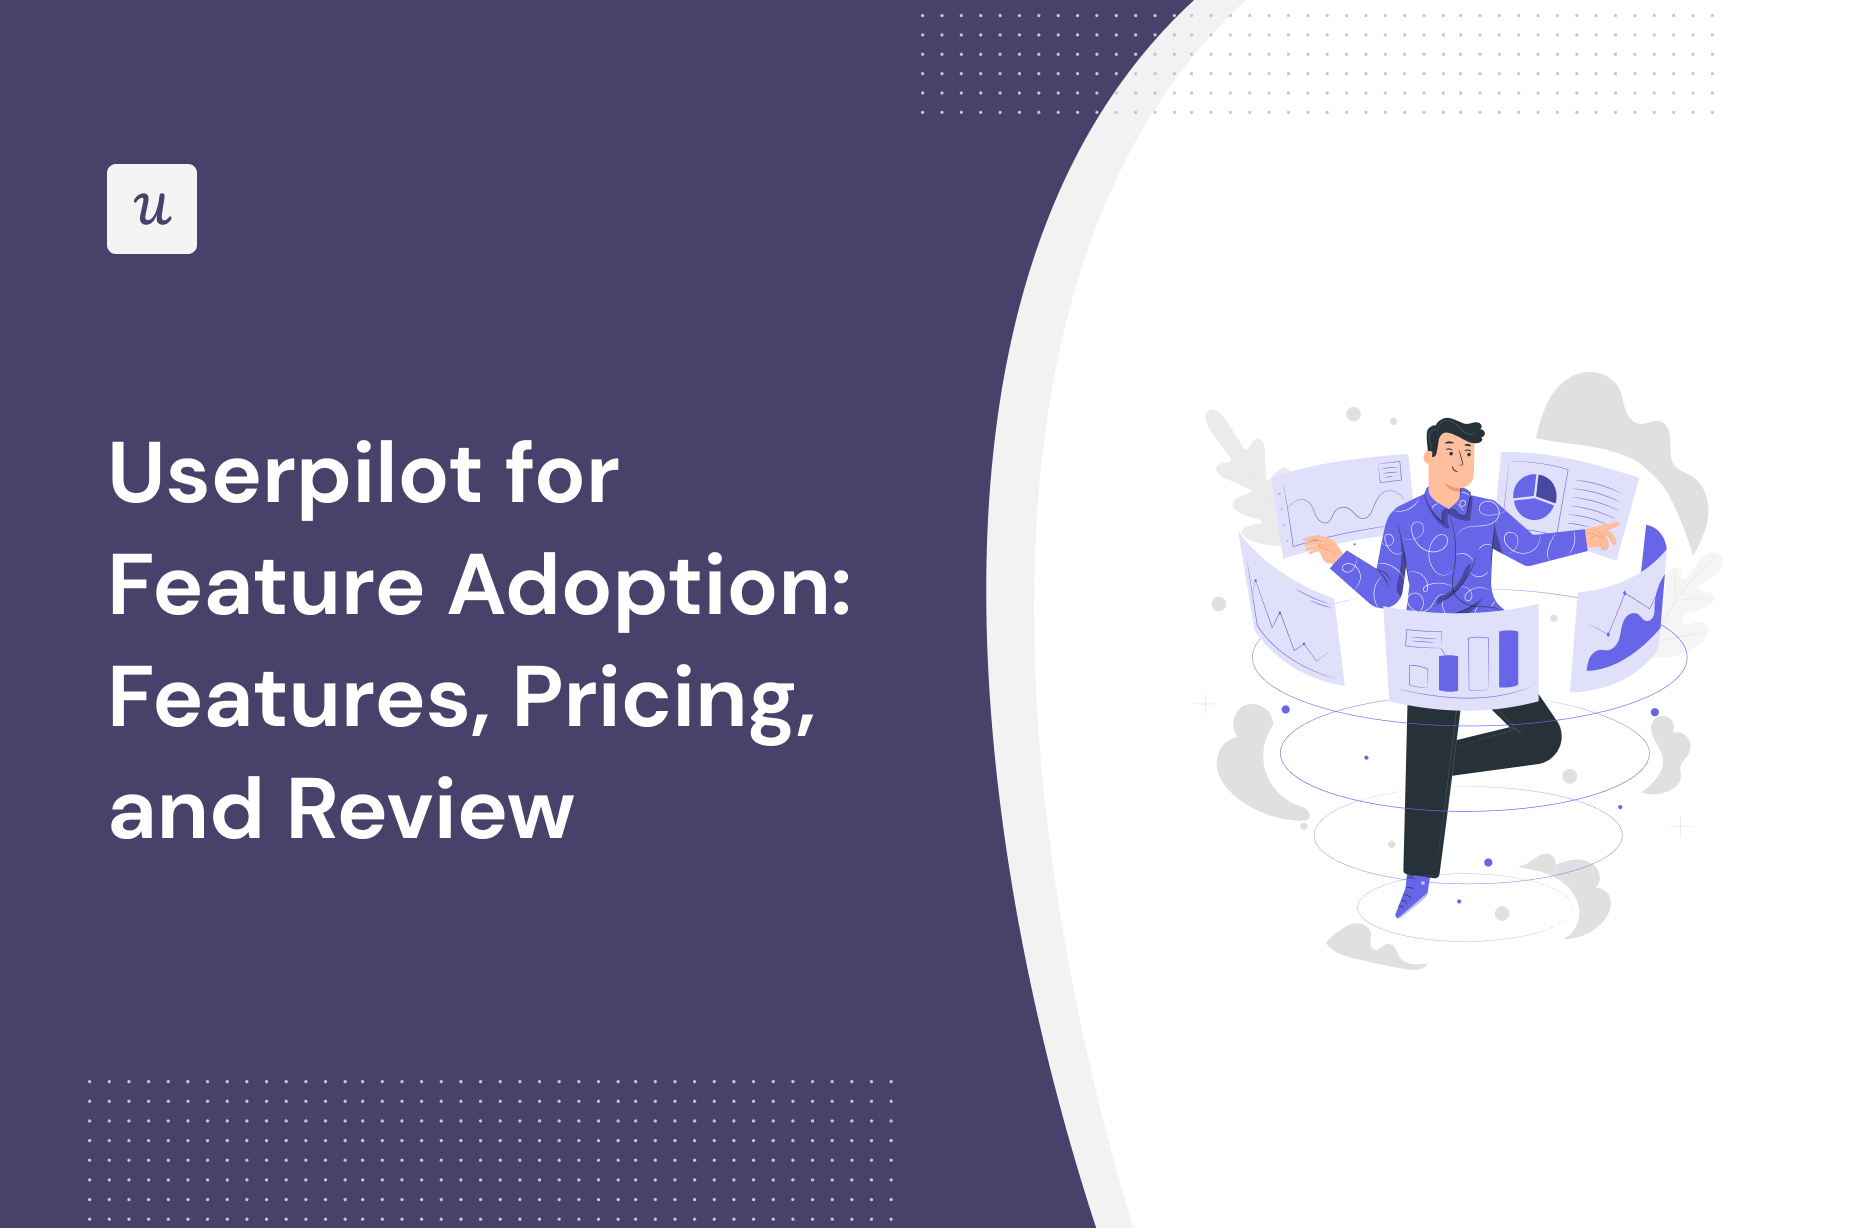 Userpilot for Feature Adoption: Features, Pricing, and Review